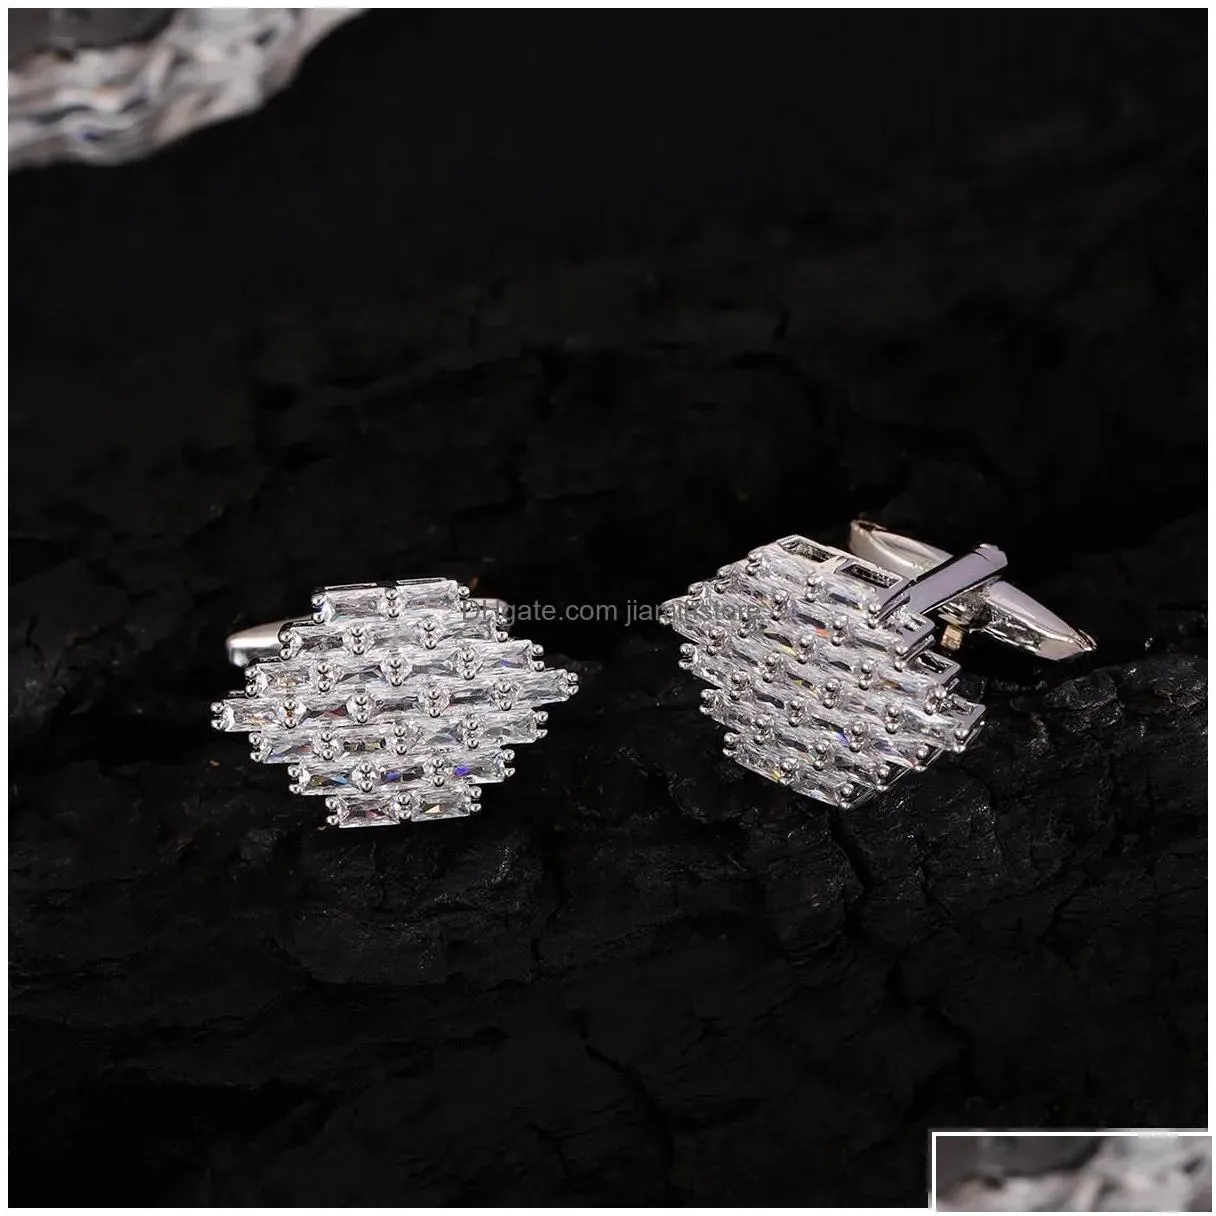 Cuff Links The Rhombus Cufflinks With Diamond Inlay A Unique Accessory To Showcase Mens Noble Character And Exquisite Taste Drop Del